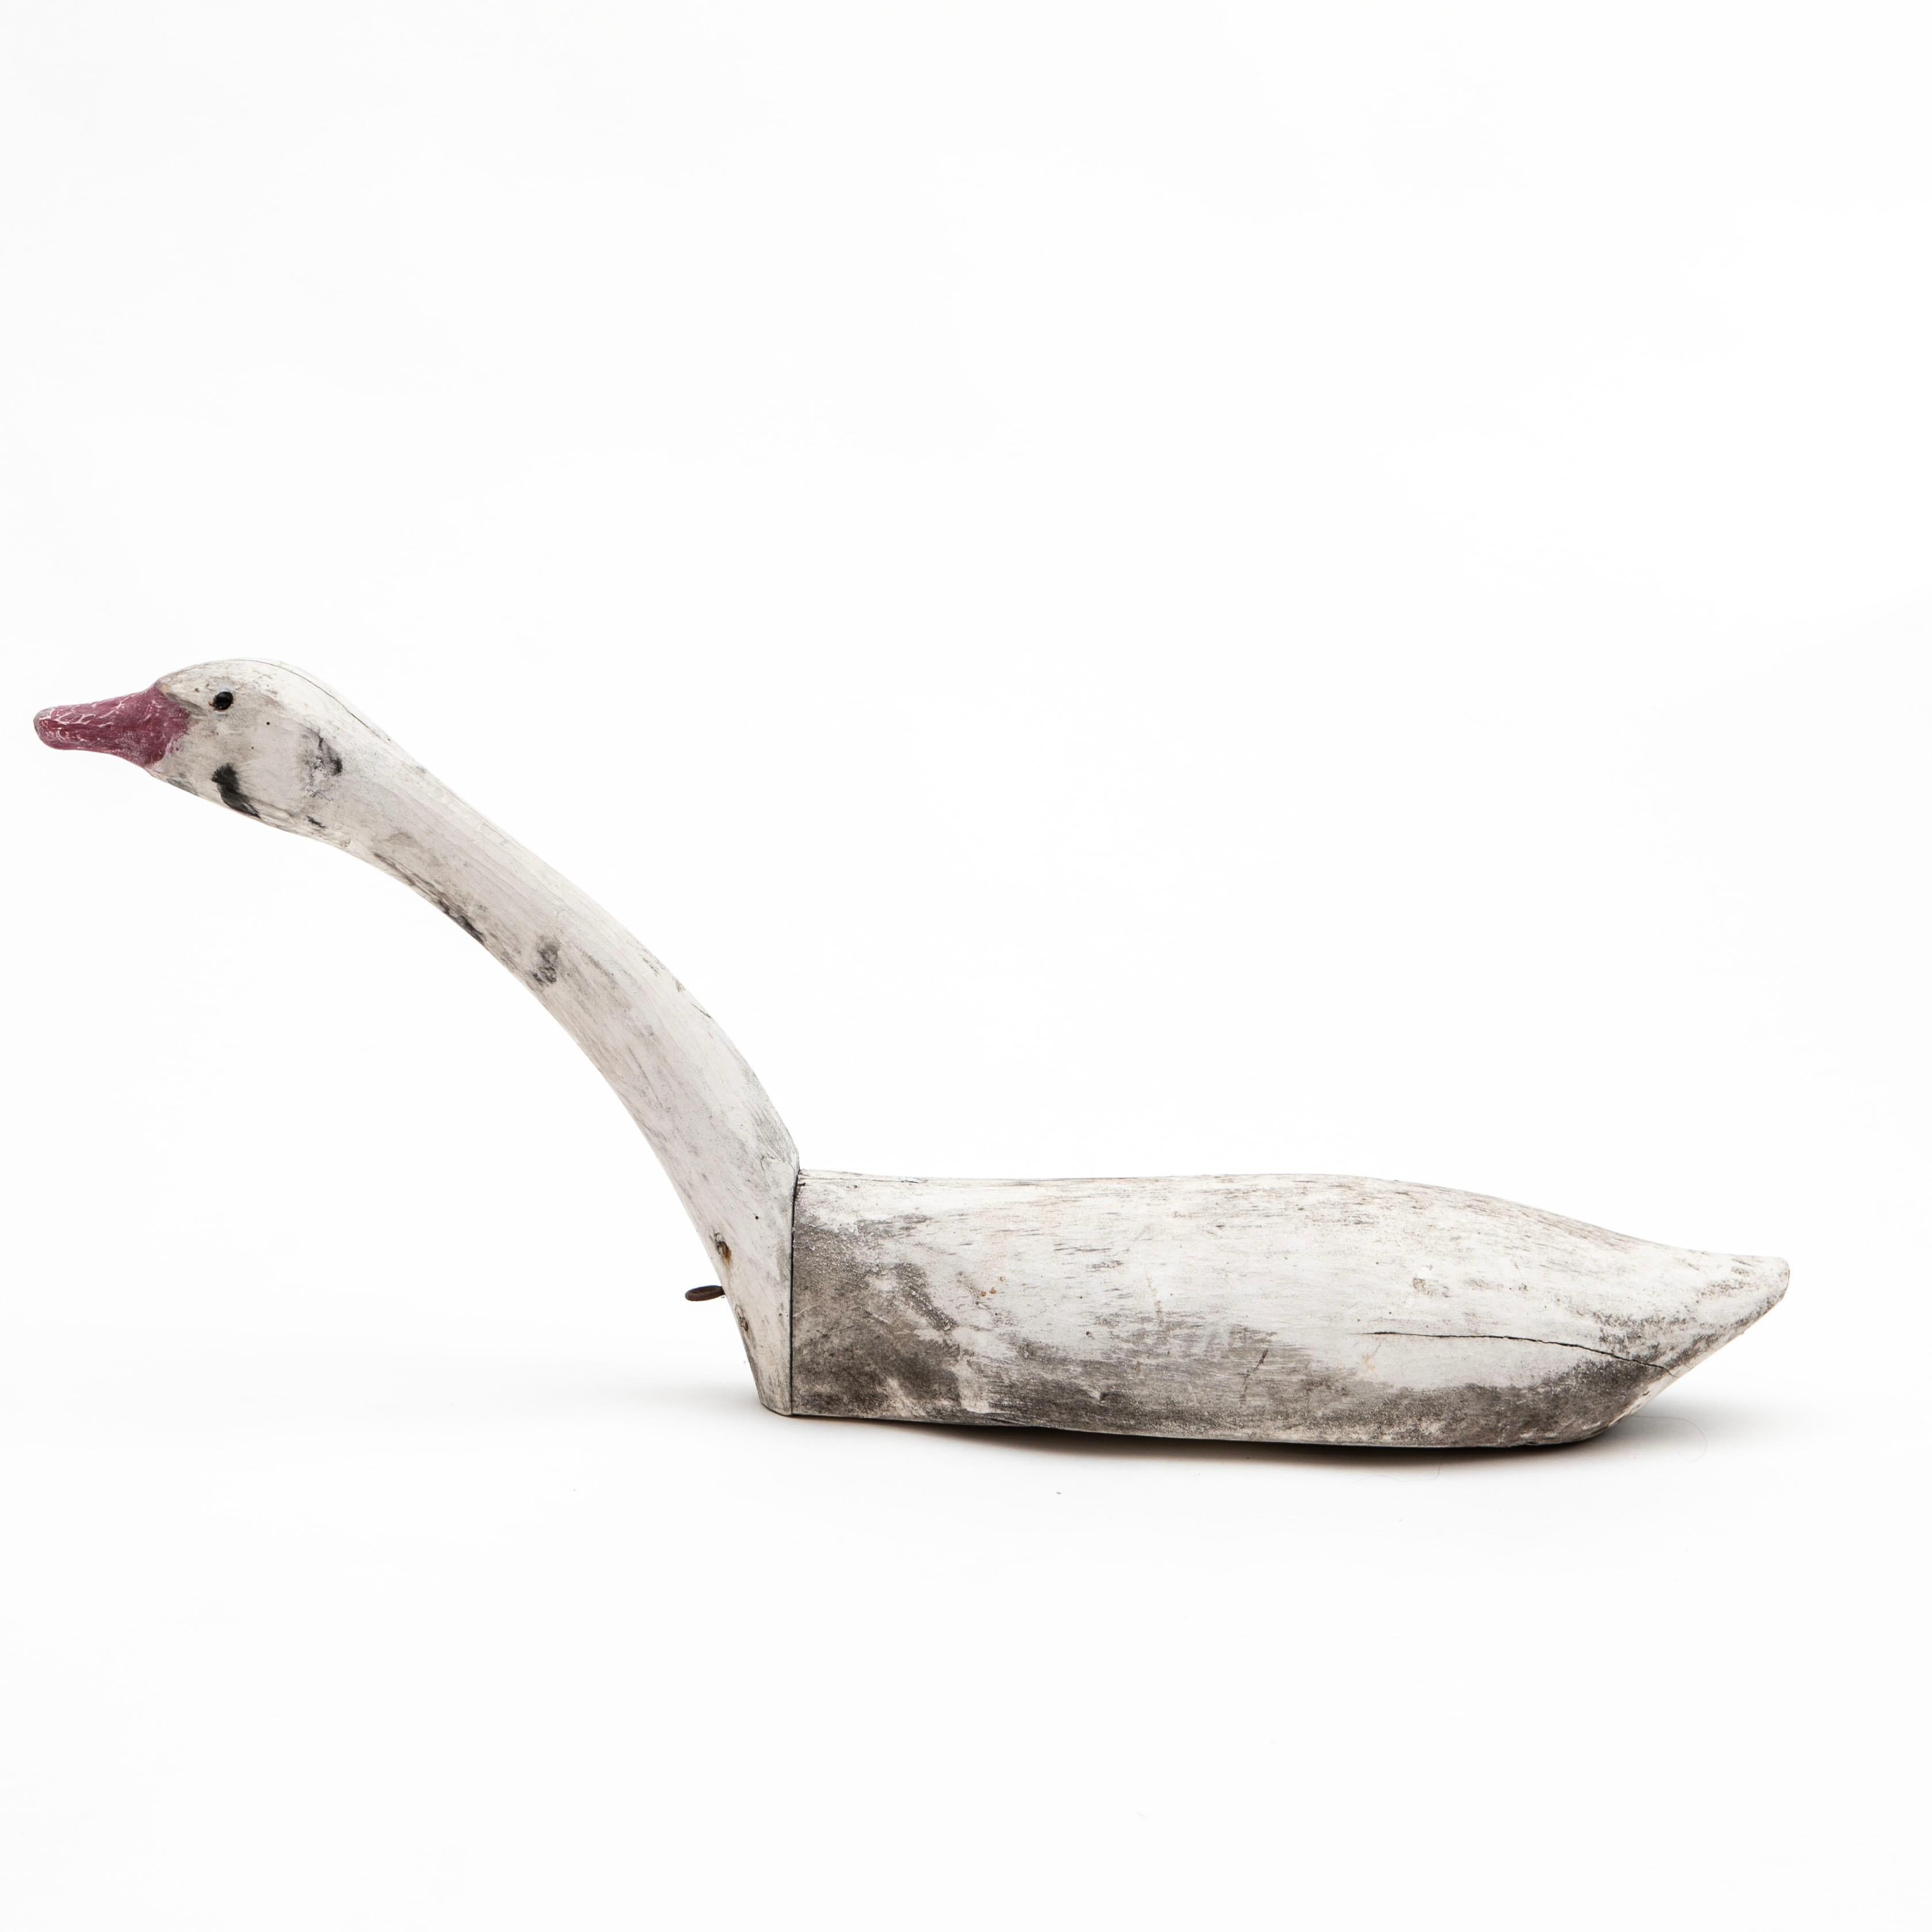 A full size hand carved and painted wooden swan decoy. 
Original paint, white body and reddish beak, glass eyes. In original condition having a wonderful aged patina.
Denmark approx. 1920
